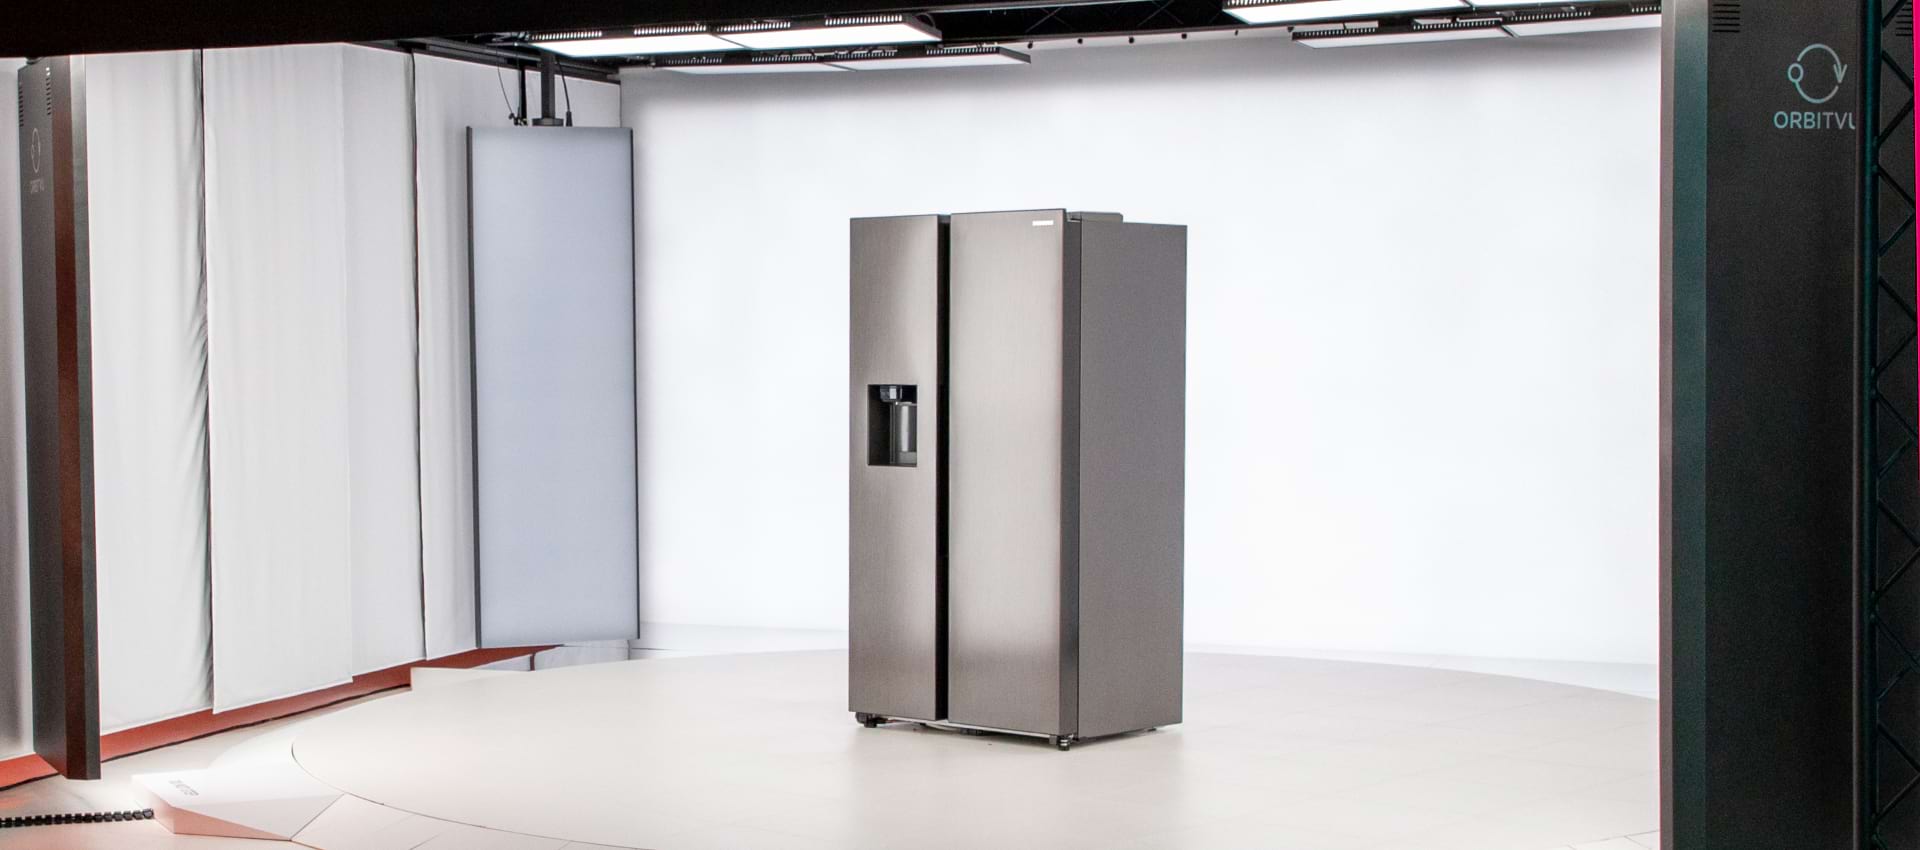 product photo of the refrigerator